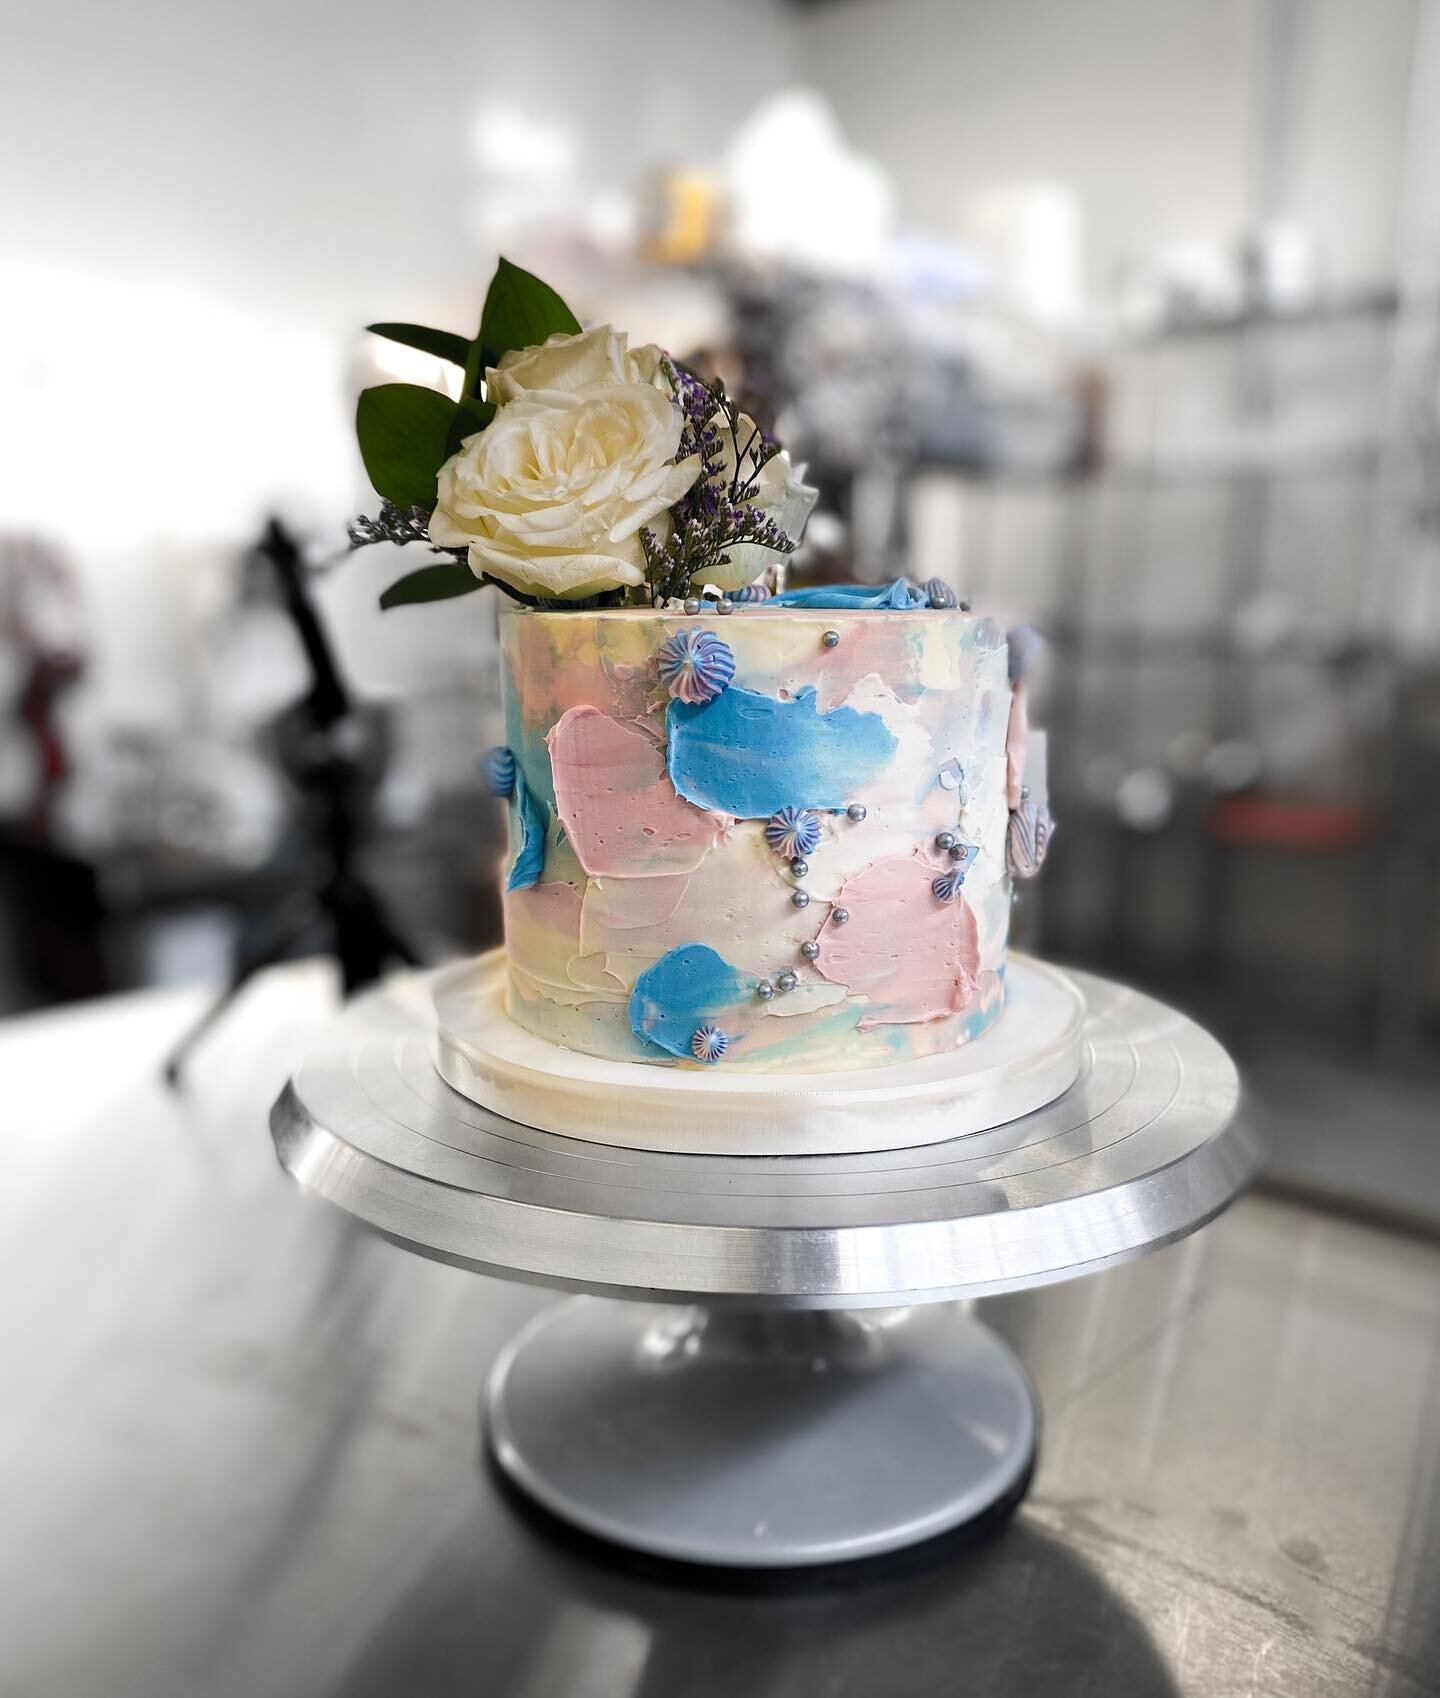 Gender reveal cakes are all the rage these days! Guess what colour the inside of this one is.
.
#genderreveal #themedcake #freshflowers #pinkorblue #thornhillbaker #thornhillbakeshop #torontopastry #The6ix  #torontocakes #wearefamily #manalbashirtoro